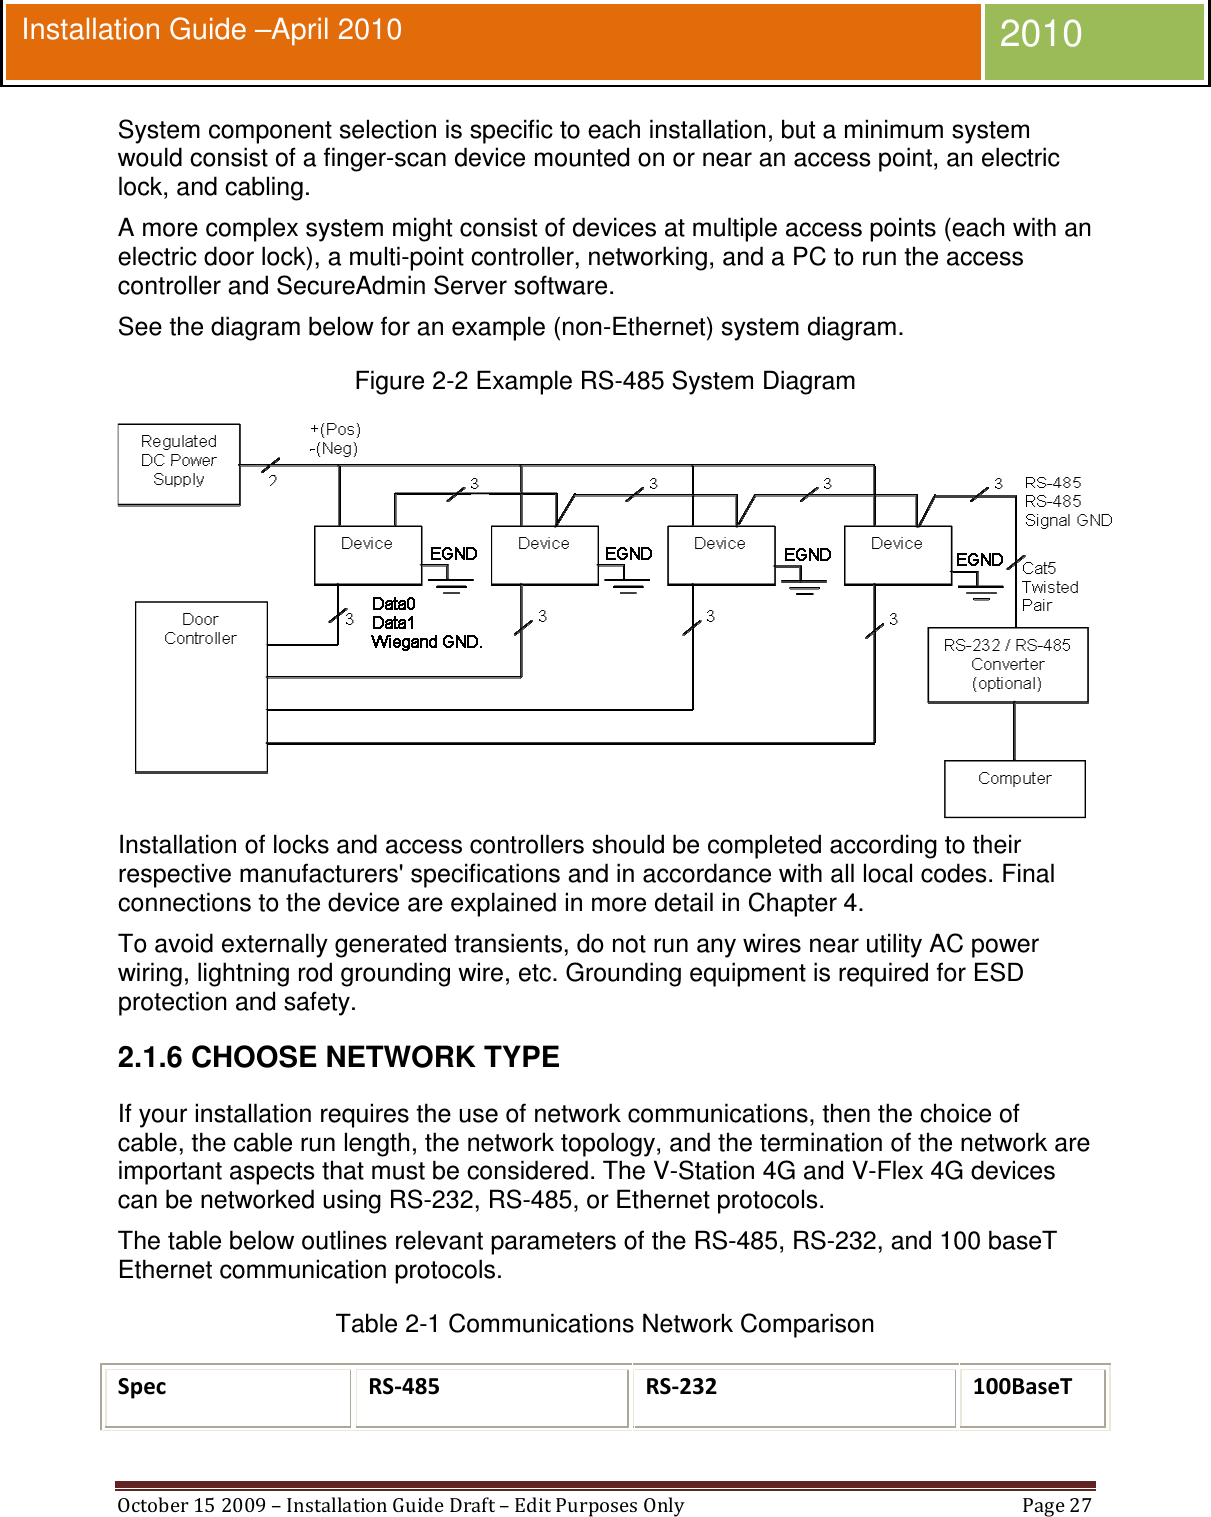  October 15 2009 – Installation Guide Draft – Edit Purposes Only  Page 27  Installation Guide –April 2010 2010 System component selection is specific to each installation, but a minimum system would consist of a finger-scan device mounted on or near an access point, an electric lock, and cabling. A more complex system might consist of devices at multiple access points (each with an electric door lock), a multi-point controller, networking, and a PC to run the access controller and SecureAdmin Server software. See the diagram below for an example (non-Ethernet) system diagram. Figure 2-2 Example RS-485 System Diagram  Installation of locks and access controllers should be completed according to their respective manufacturers&apos; specifications and in accordance with all local codes. Final connections to the device are explained in more detail in Chapter 4. To avoid externally generated transients, do not run any wires near utility AC power wiring, lightning rod grounding wire, etc. Grounding equipment is required for ESD protection and safety. 2.1.6 CHOOSE NETWORK TYPE If your installation requires the use of network communications, then the choice of cable, the cable run length, the network topology, and the termination of the network are important aspects that must be considered. The V-Station 4G and V-Flex 4G devices can be networked using RS-232, RS-485, or Ethernet protocols. The table below outlines relevant parameters of the RS-485, RS-232, and 100 baseT Ethernet communication protocols. Table 2-1 Communications Network Comparison Spec  RS-485 RS-232 100BaseT  